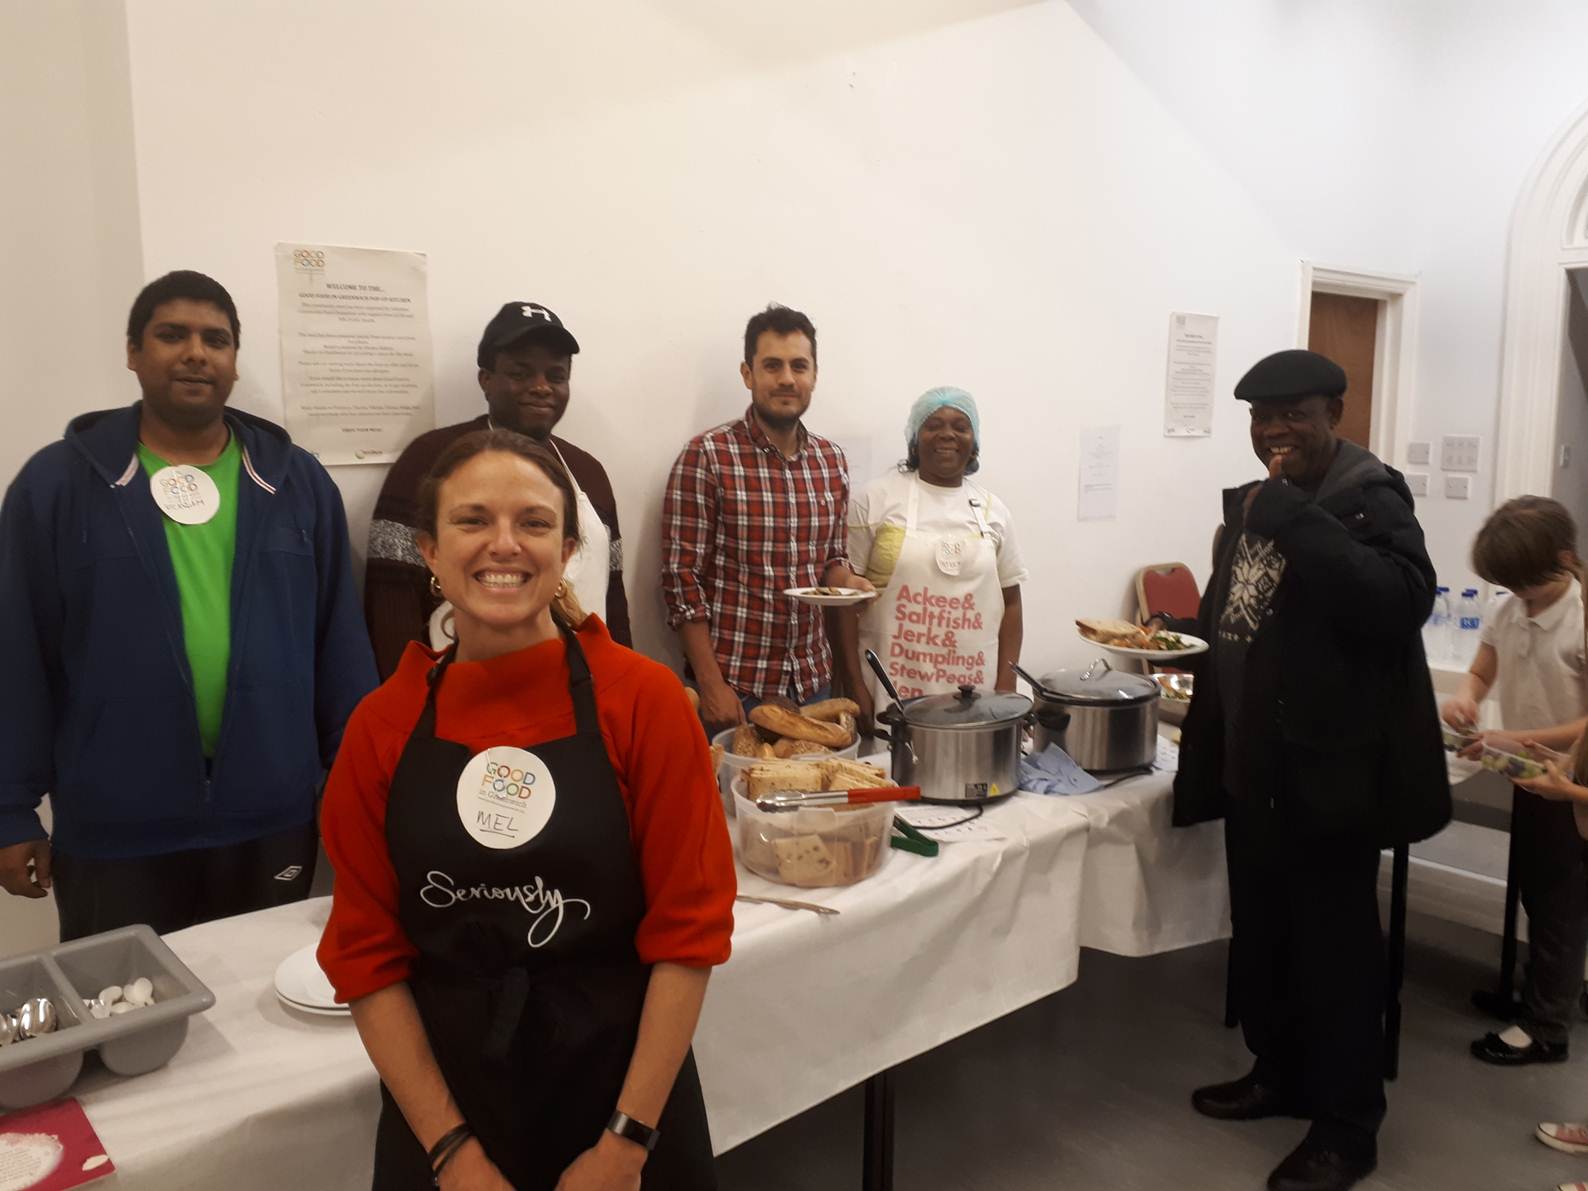 Free community meals in Royal Greenwich